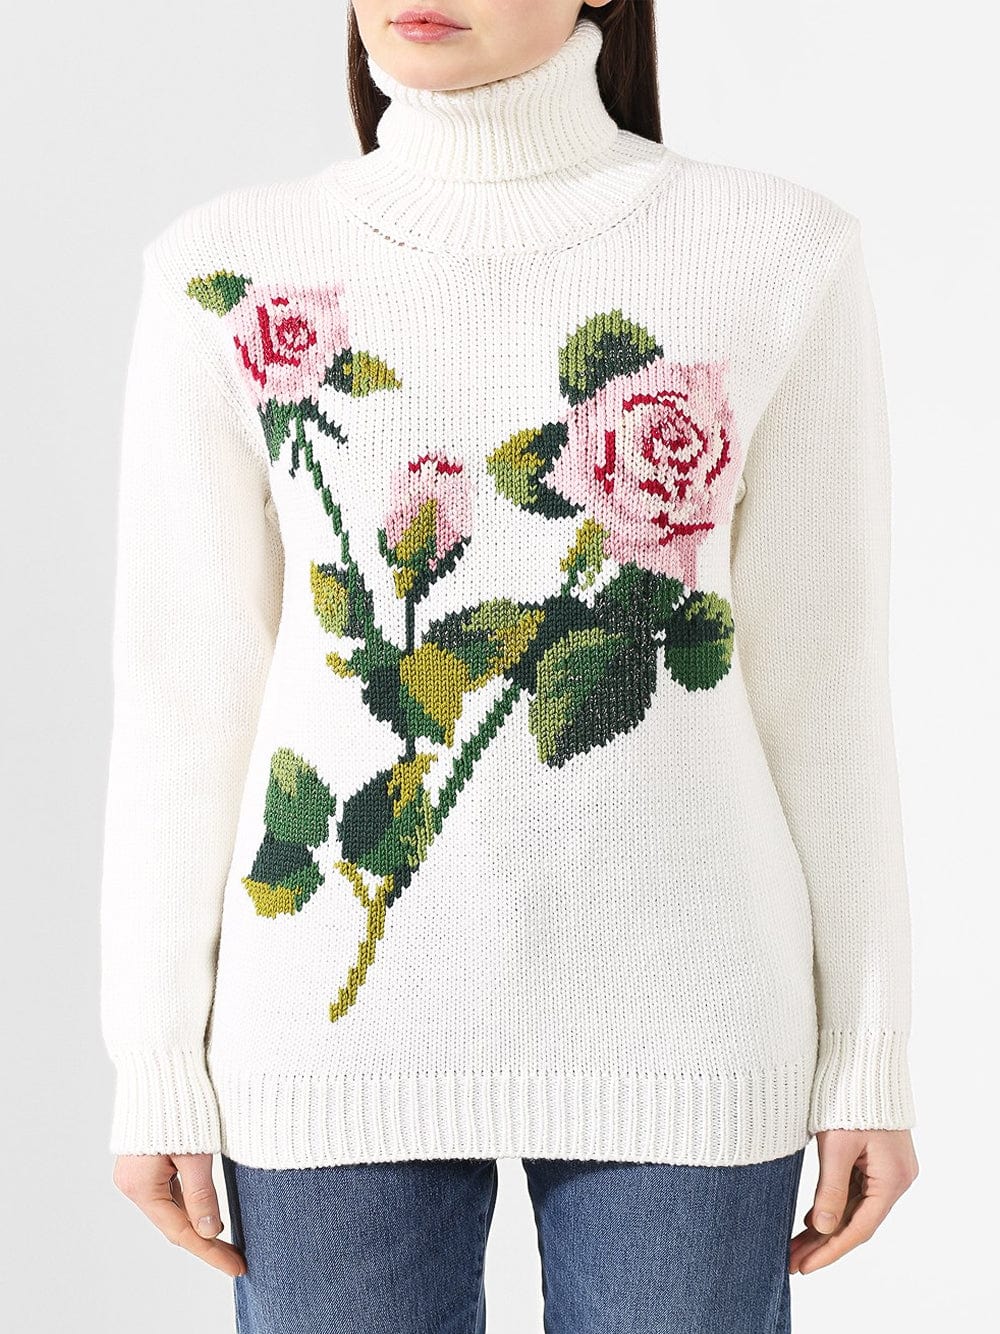 Dolce & Gabbana Floral Knitted Turtle Neck Sweater